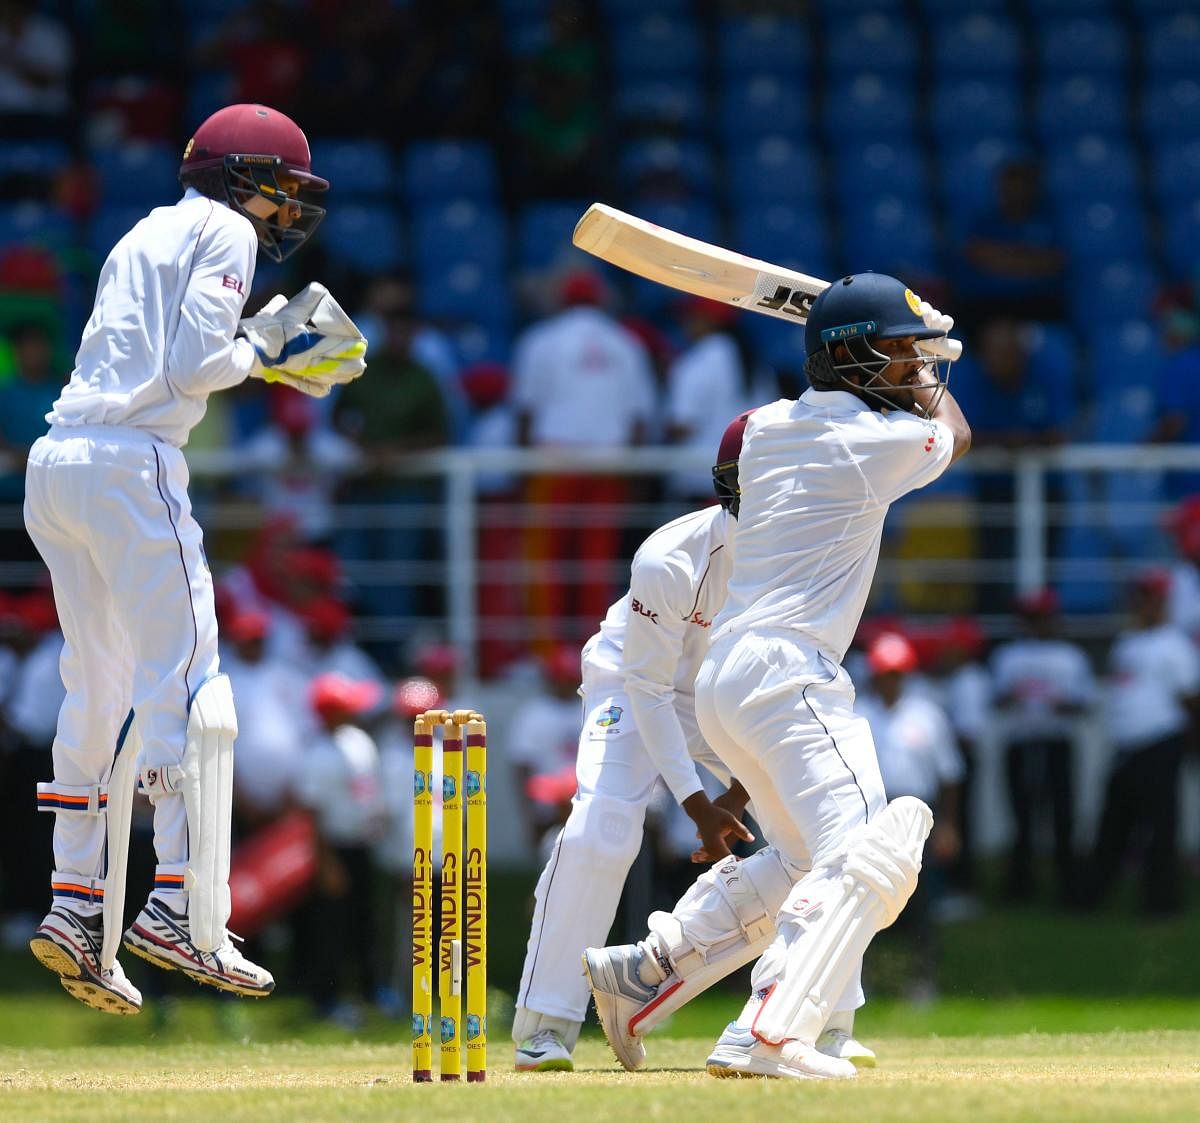 Dinesh Chandimal cuts one to the fence en route his unbeaten 119 against West Indies. AFP